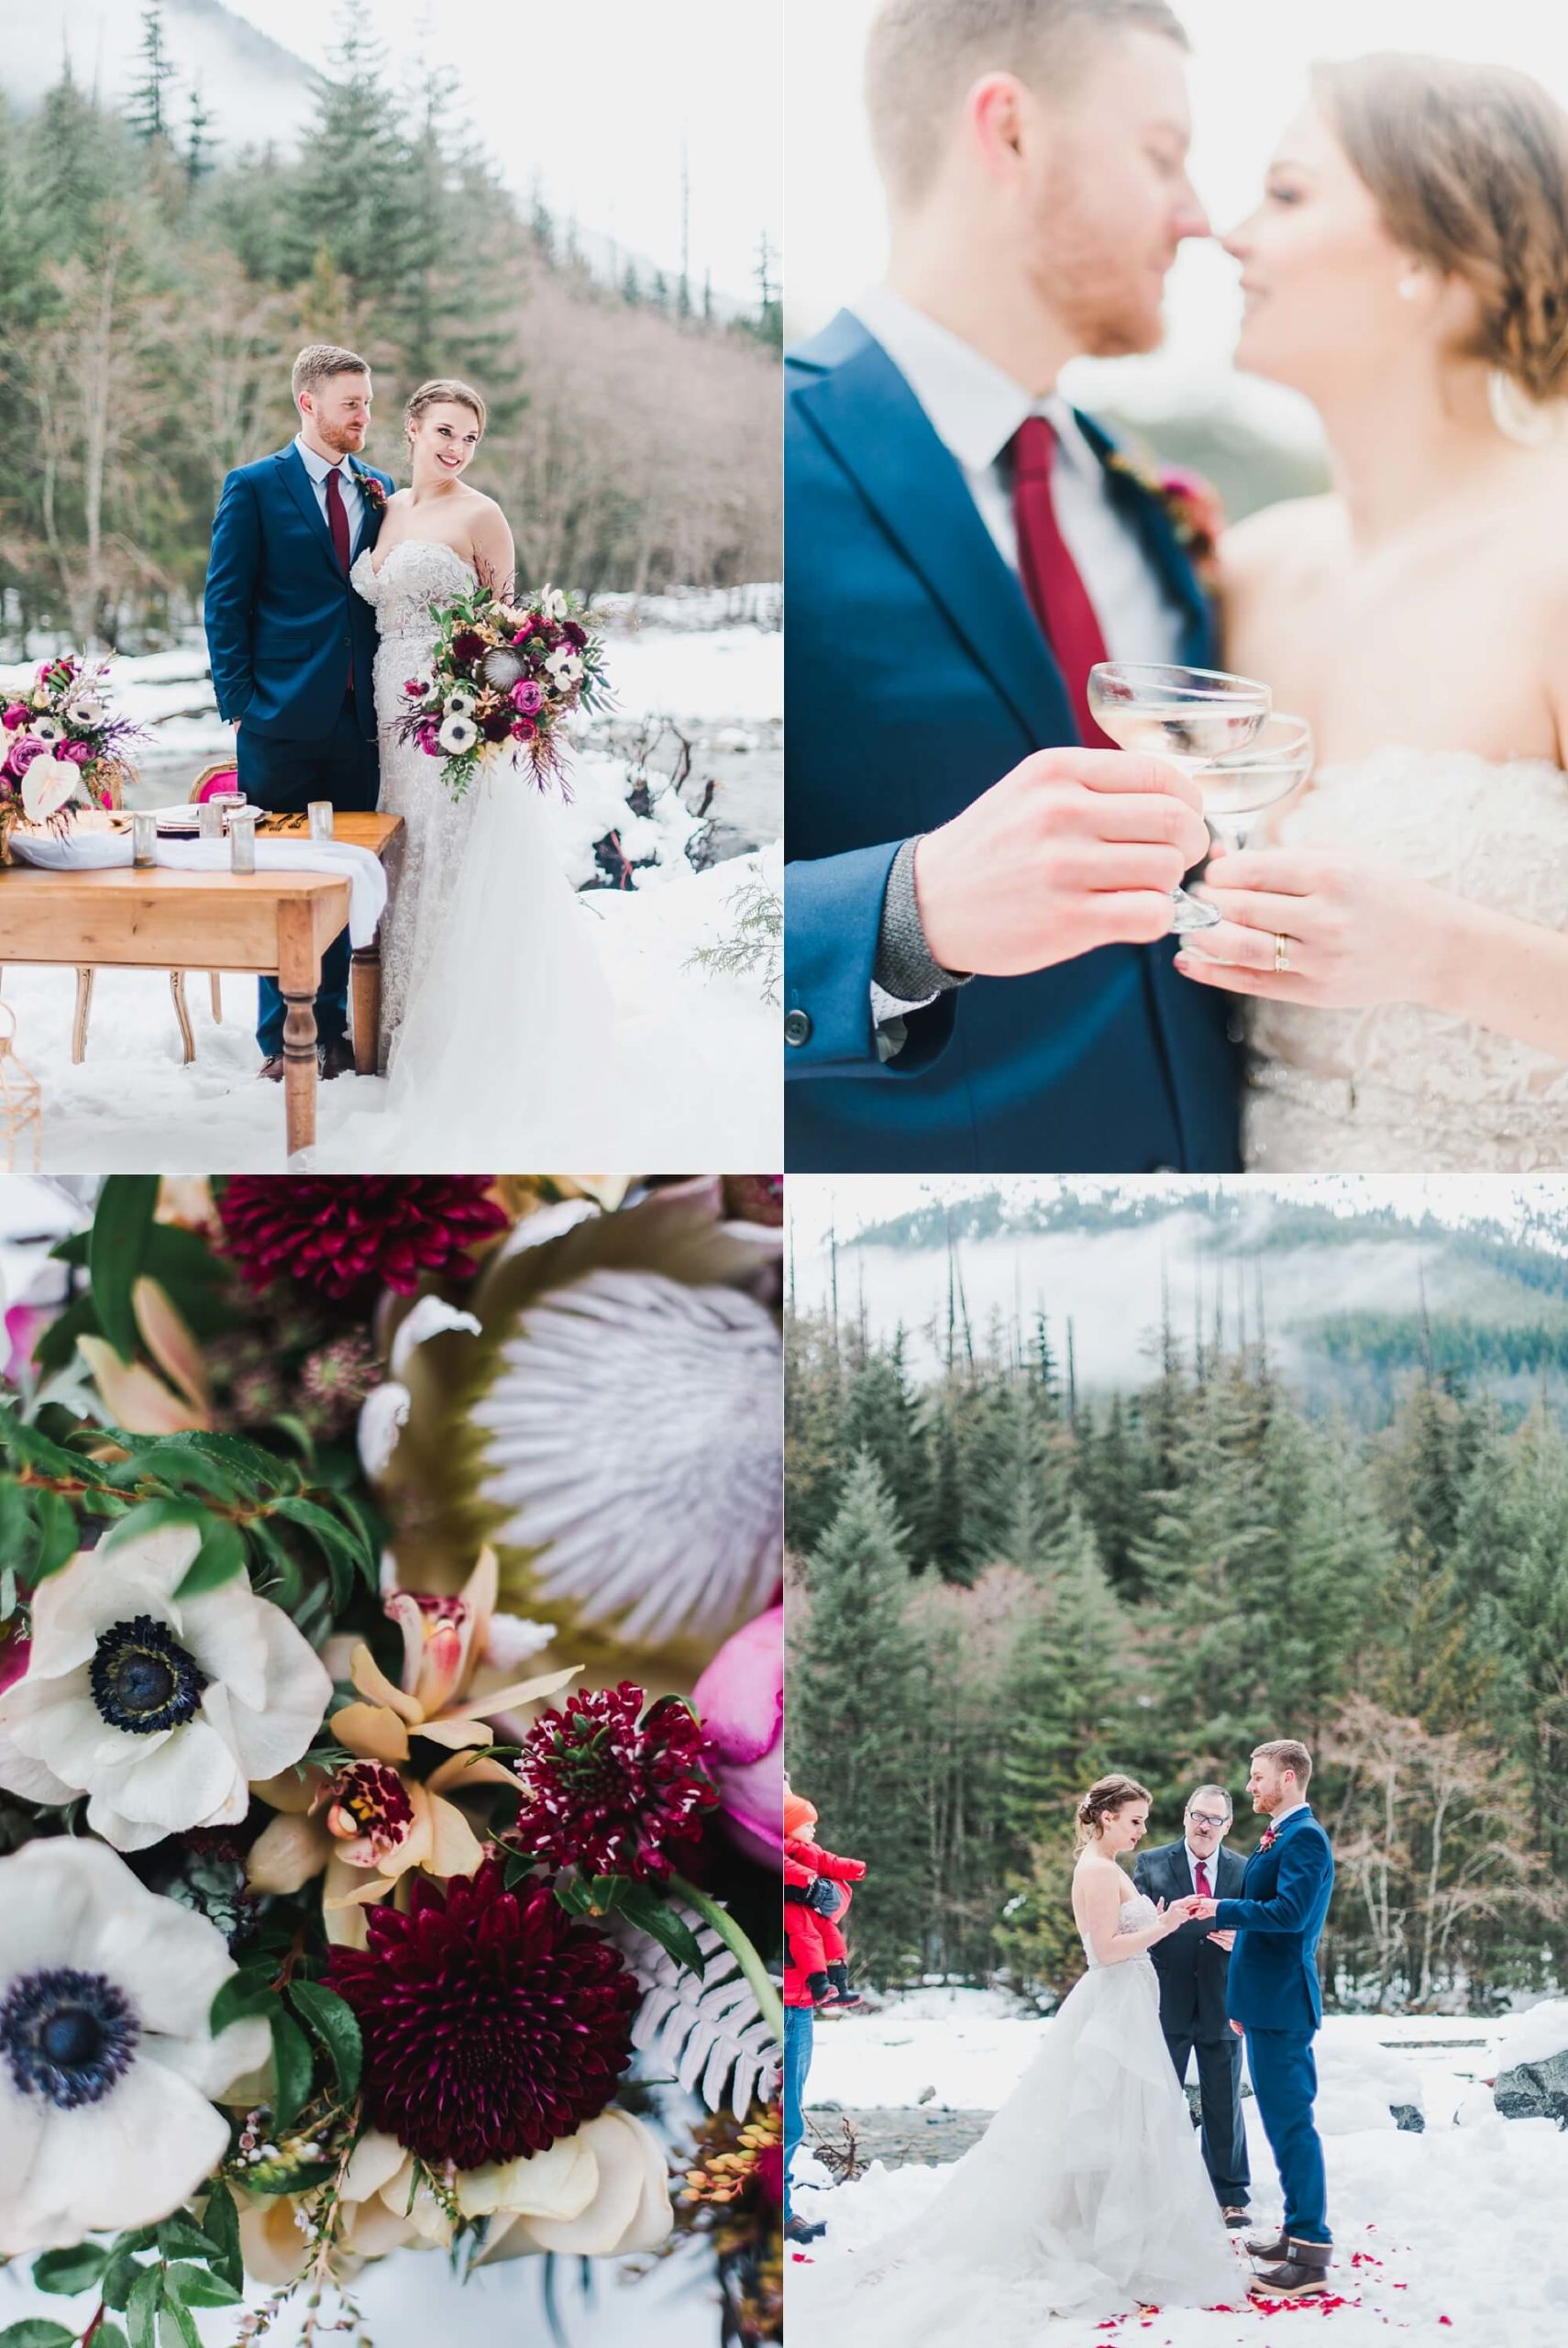 Snowy Seattle elopement at Snoqualmie